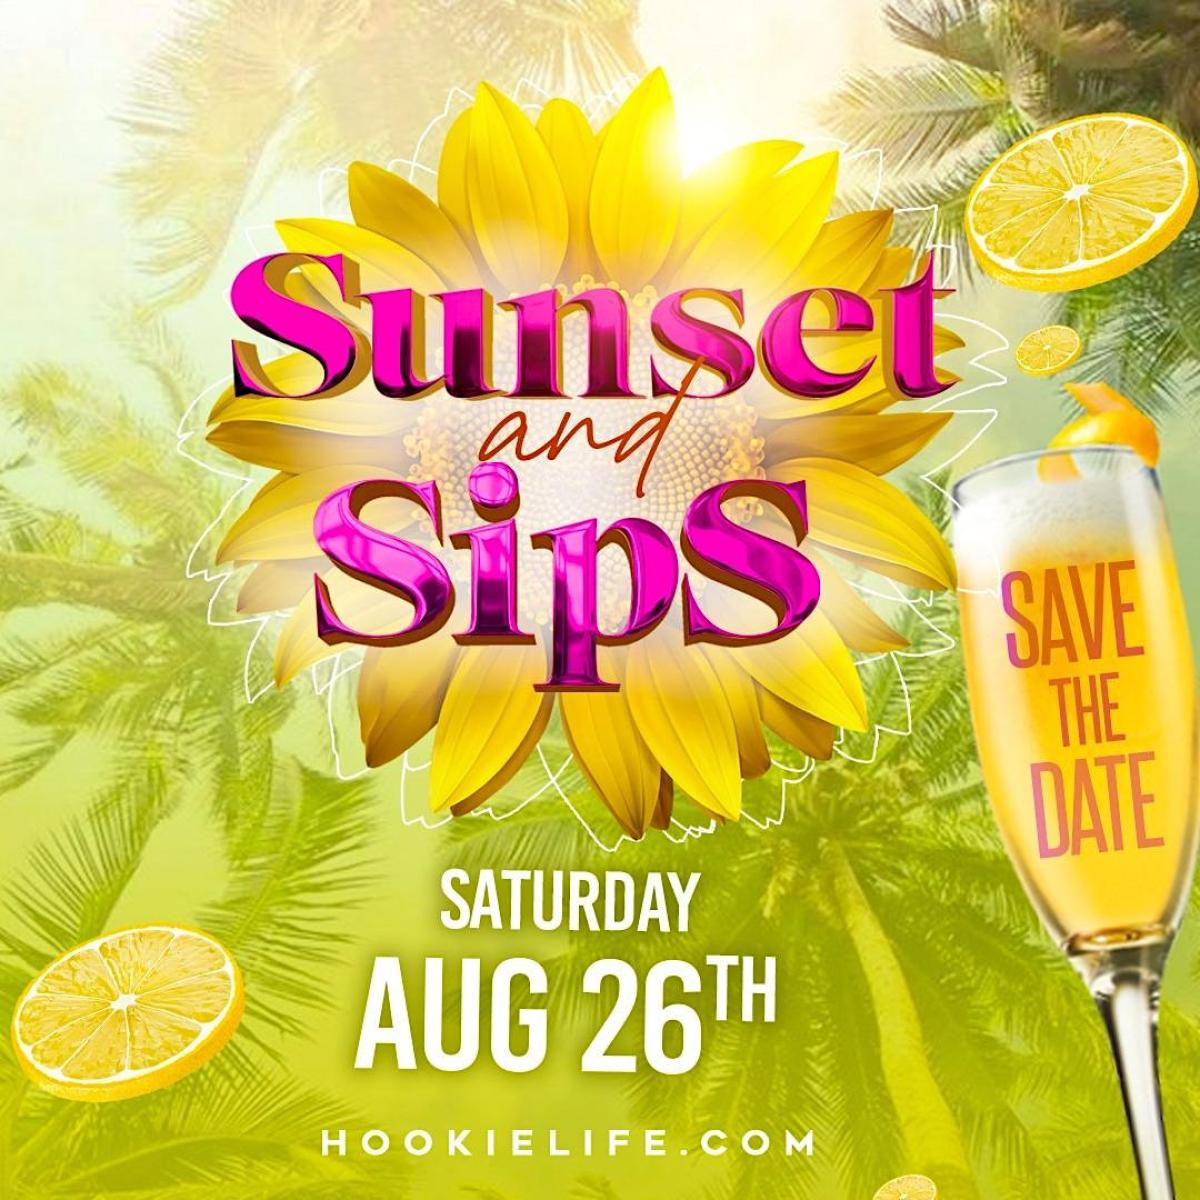 Sunset & Sips 2023 (Outdoor Day-Party) flyer or graphic.